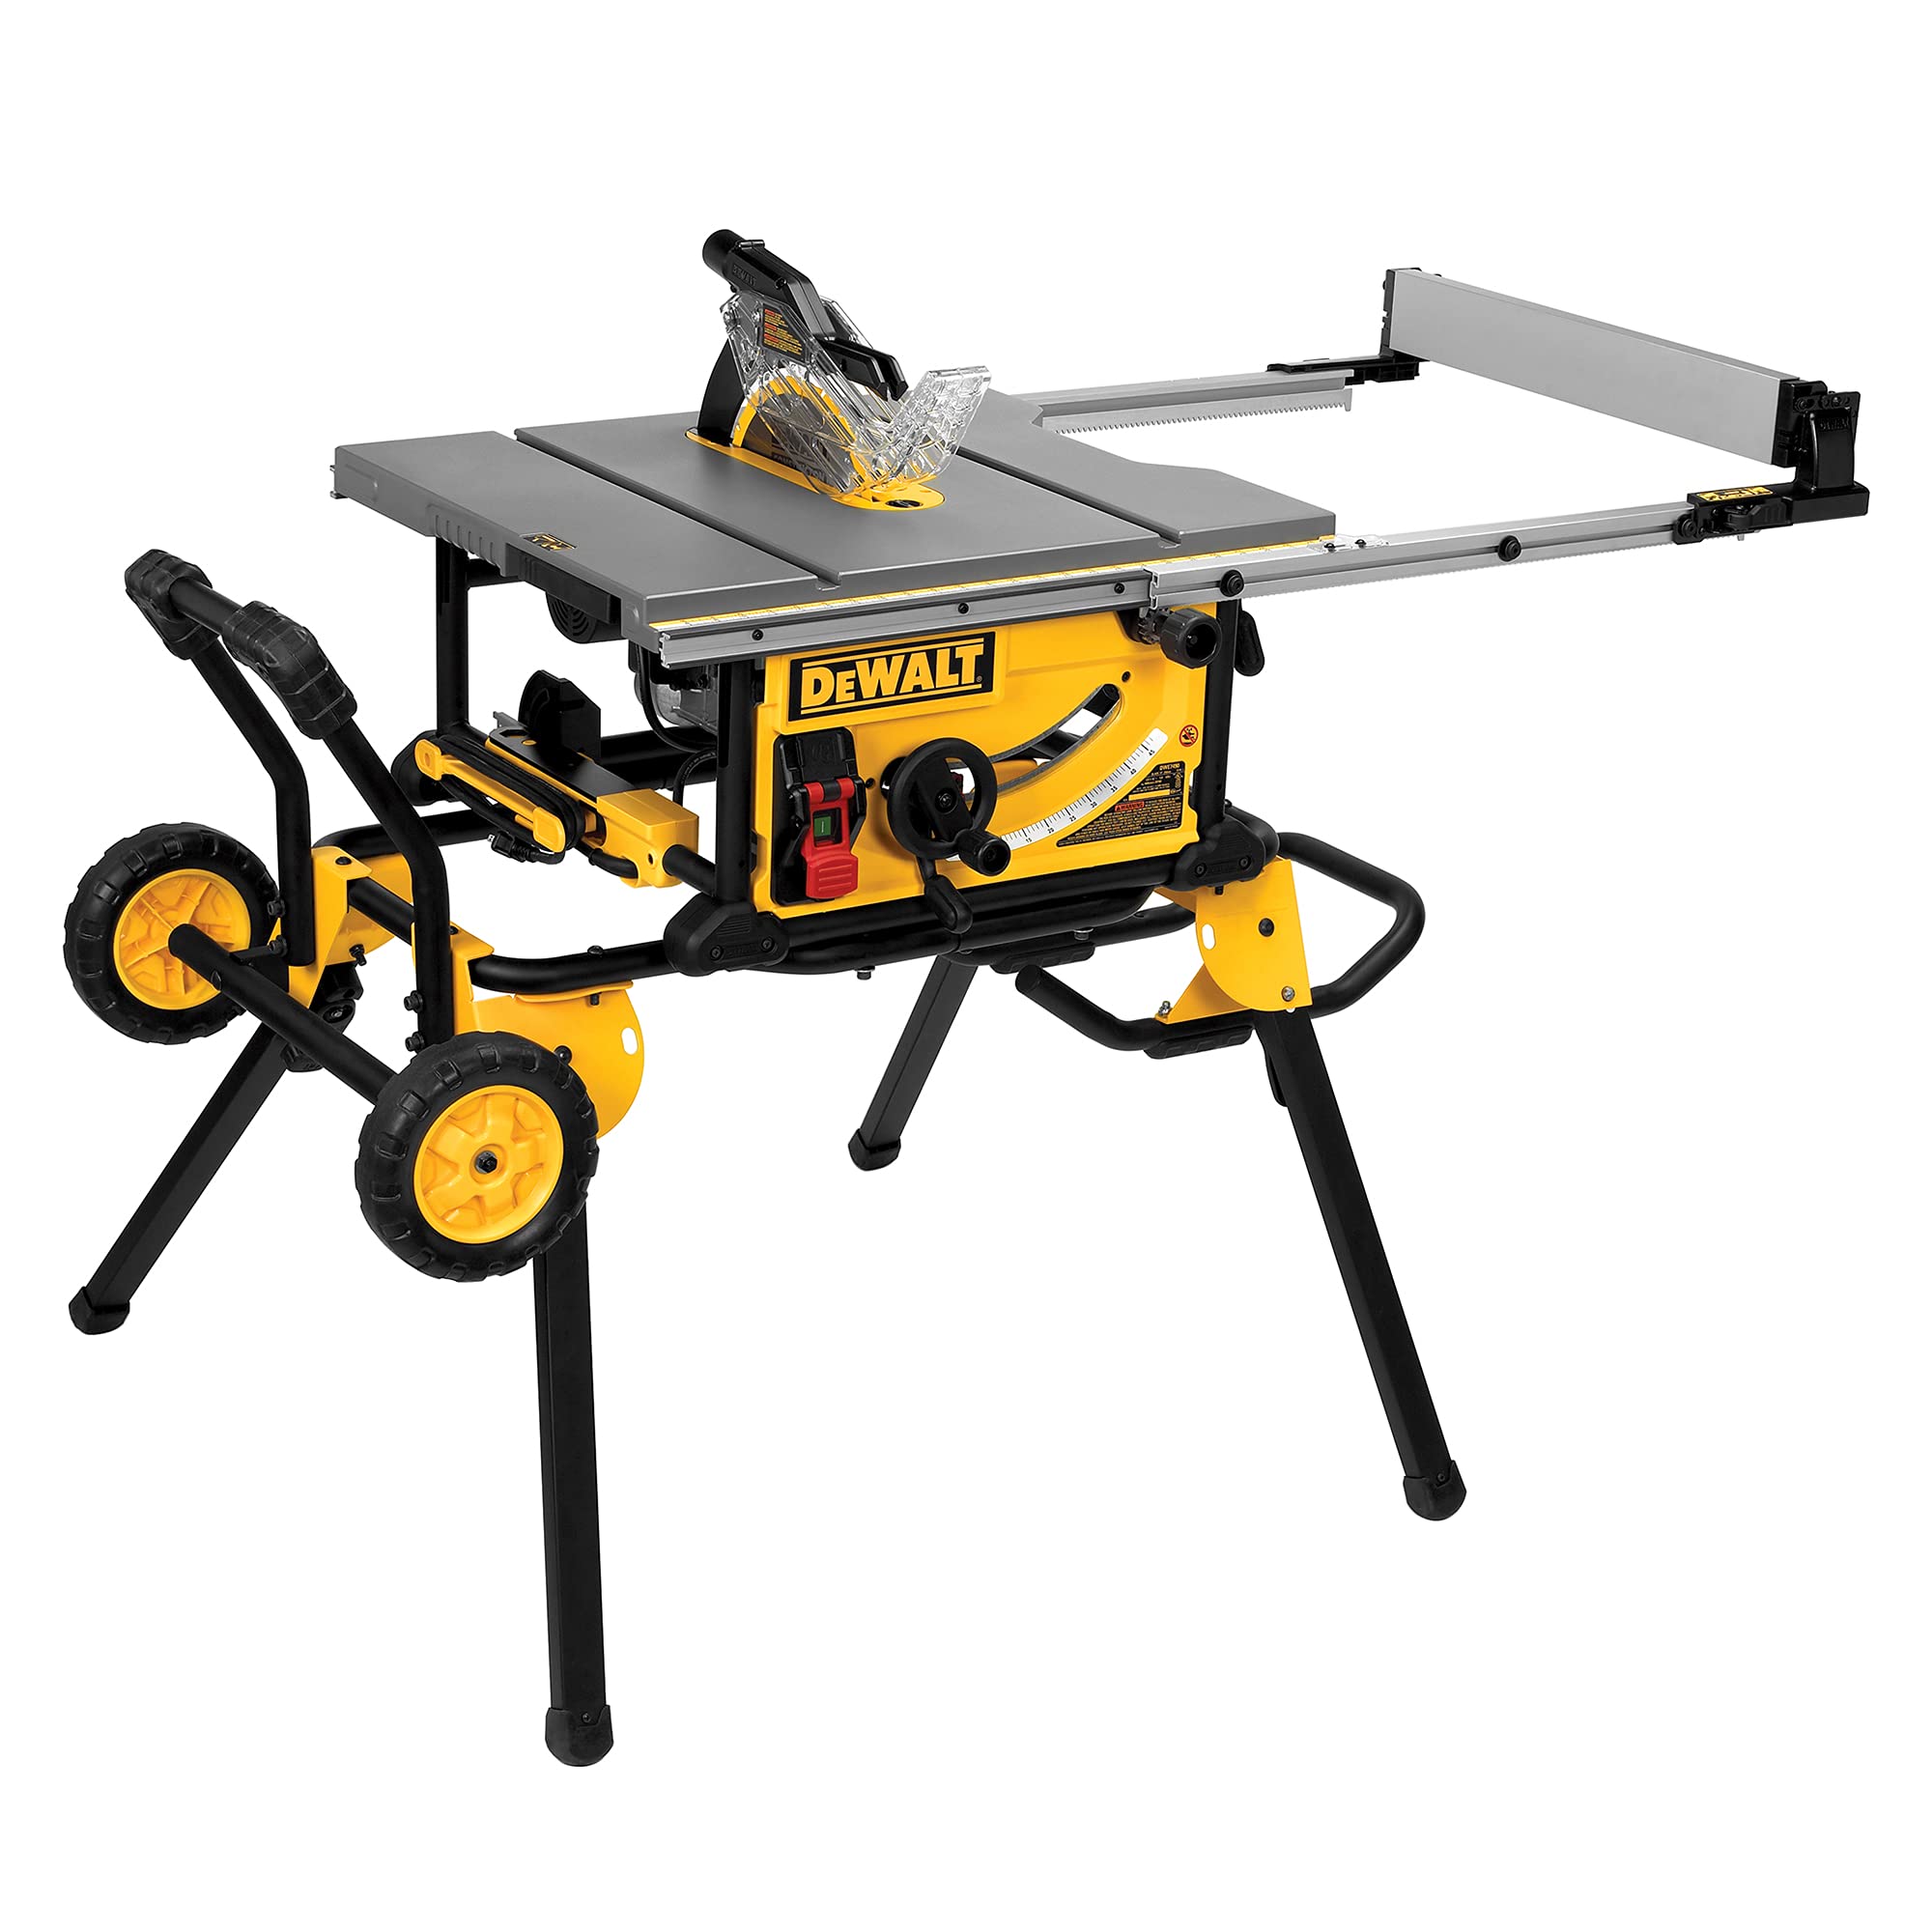 DEWALT DWE7491RS 10 Inch Table Saw, 32-1/2 Inch Rip Capacity, 15 Amp Motor, With Rolling/Collapsible Stand - $474